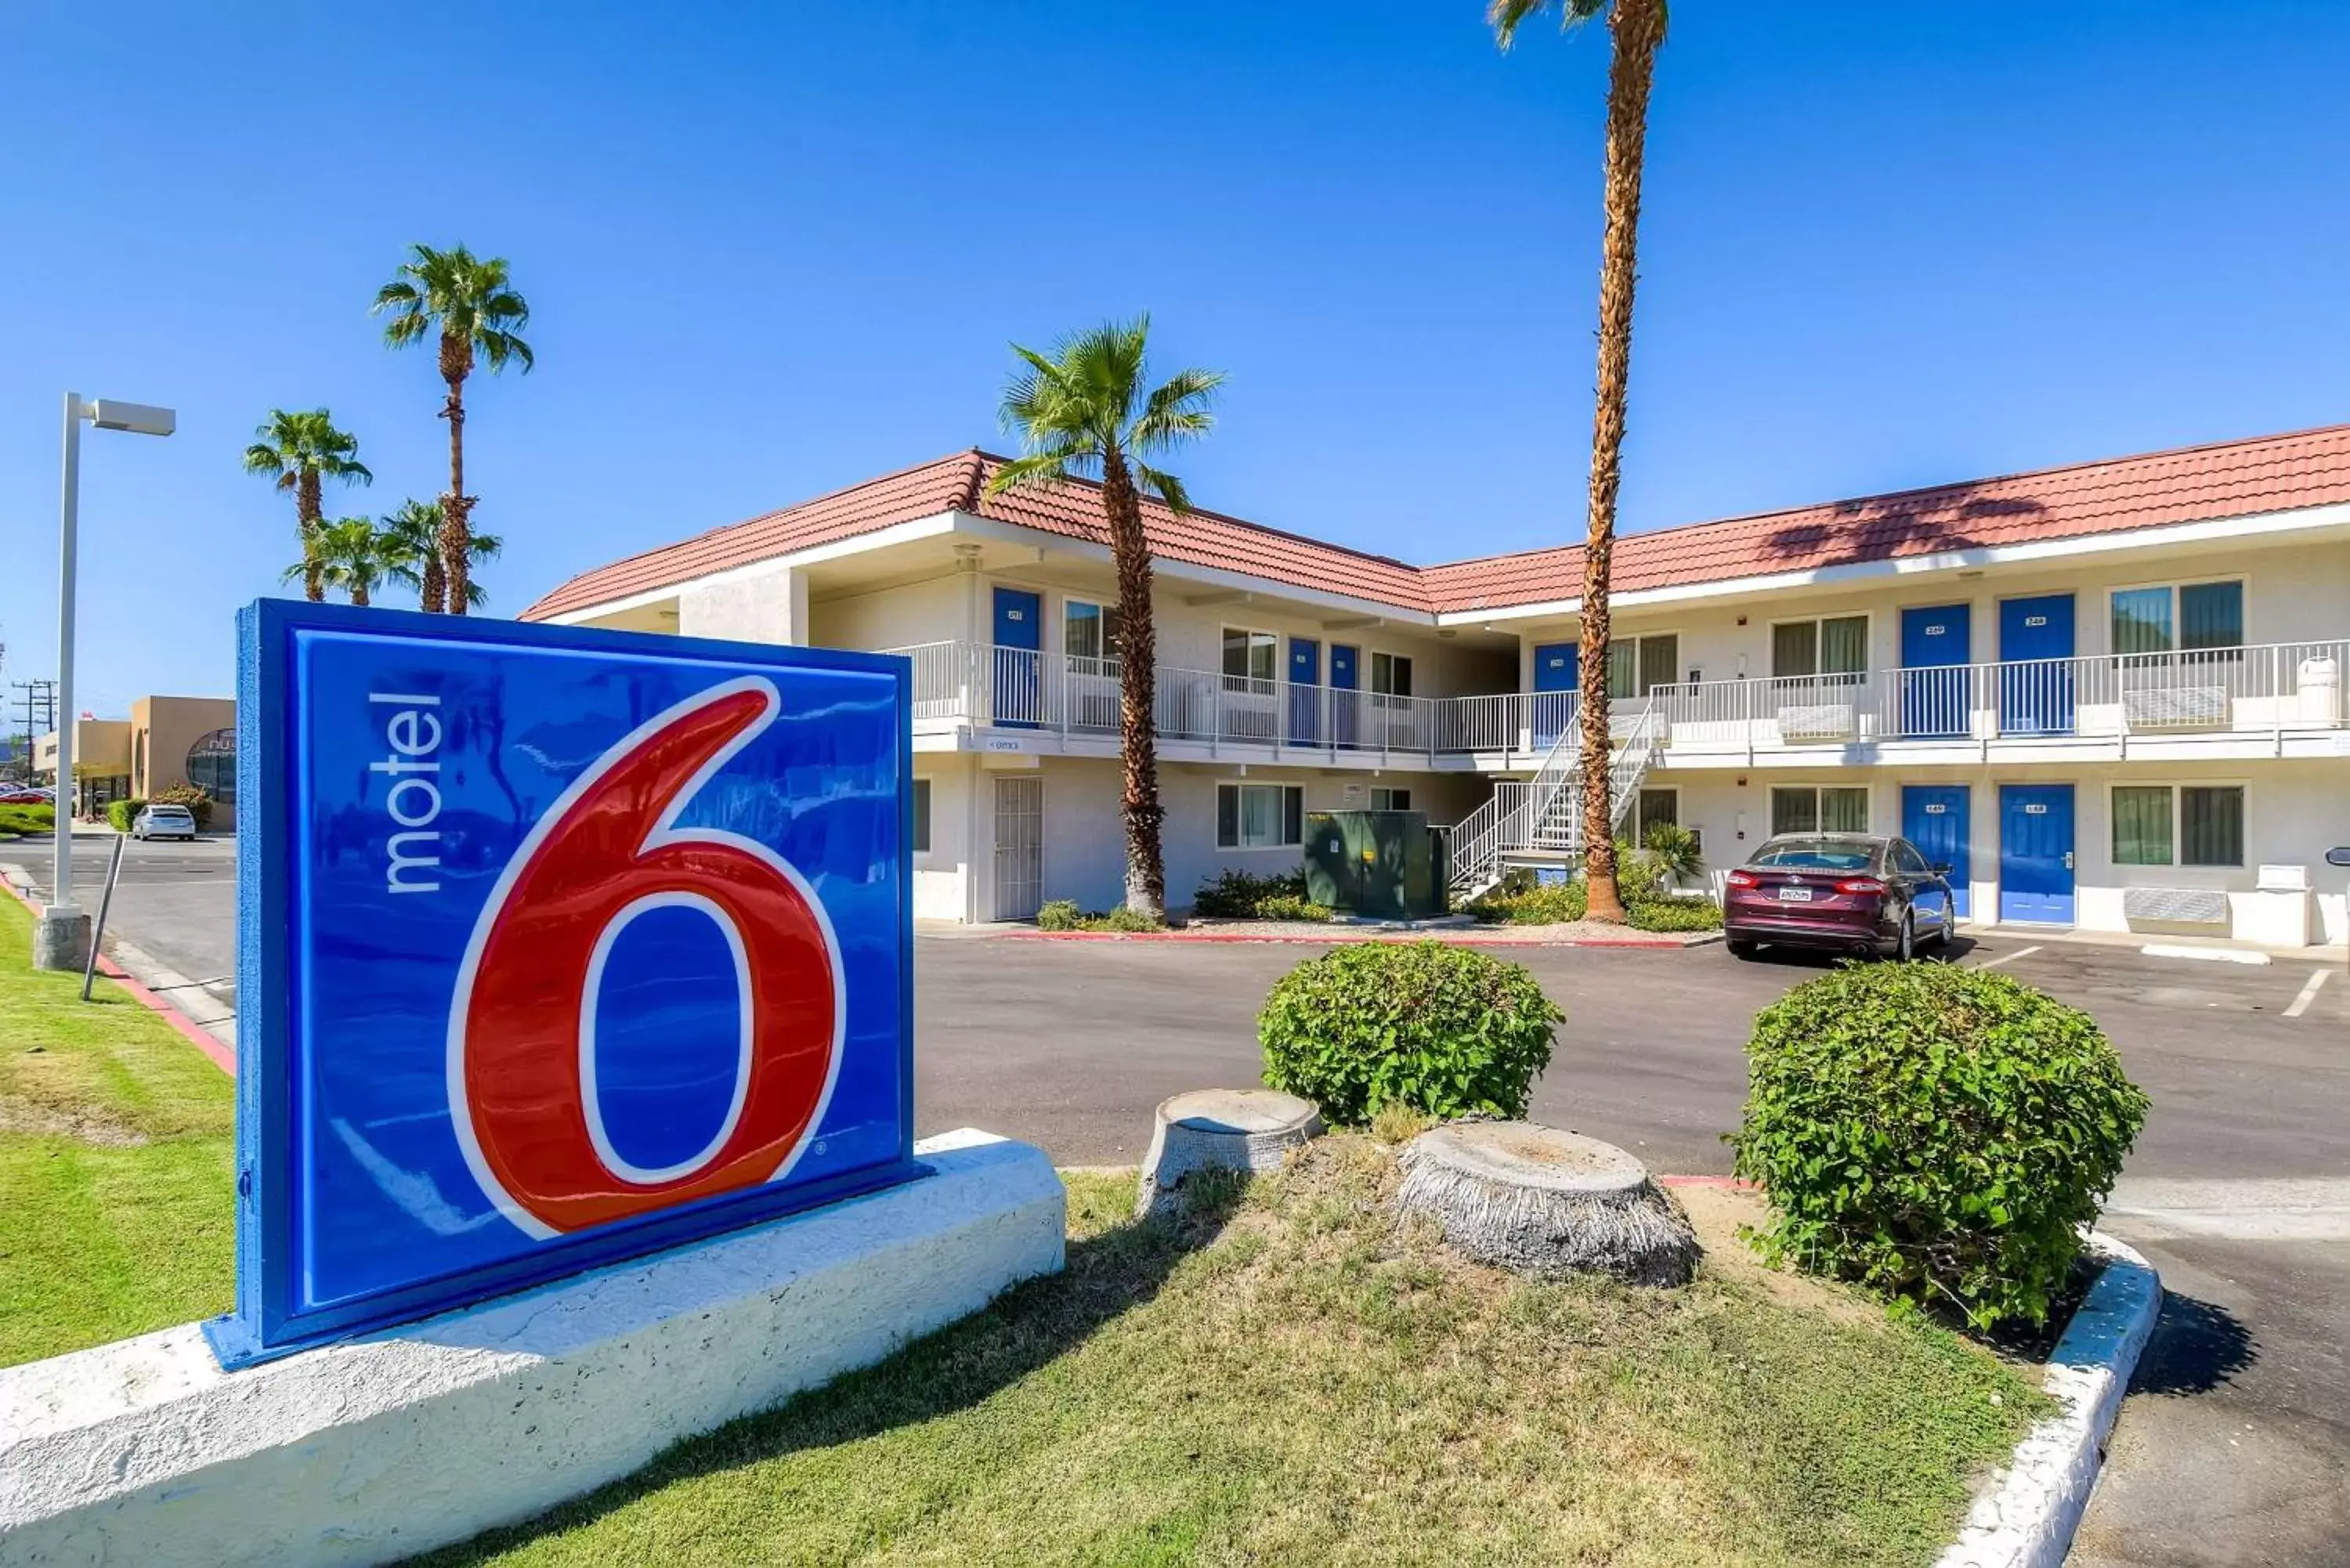 Property building in Motel 6-Rancho Mirage, CA - Palm Springs